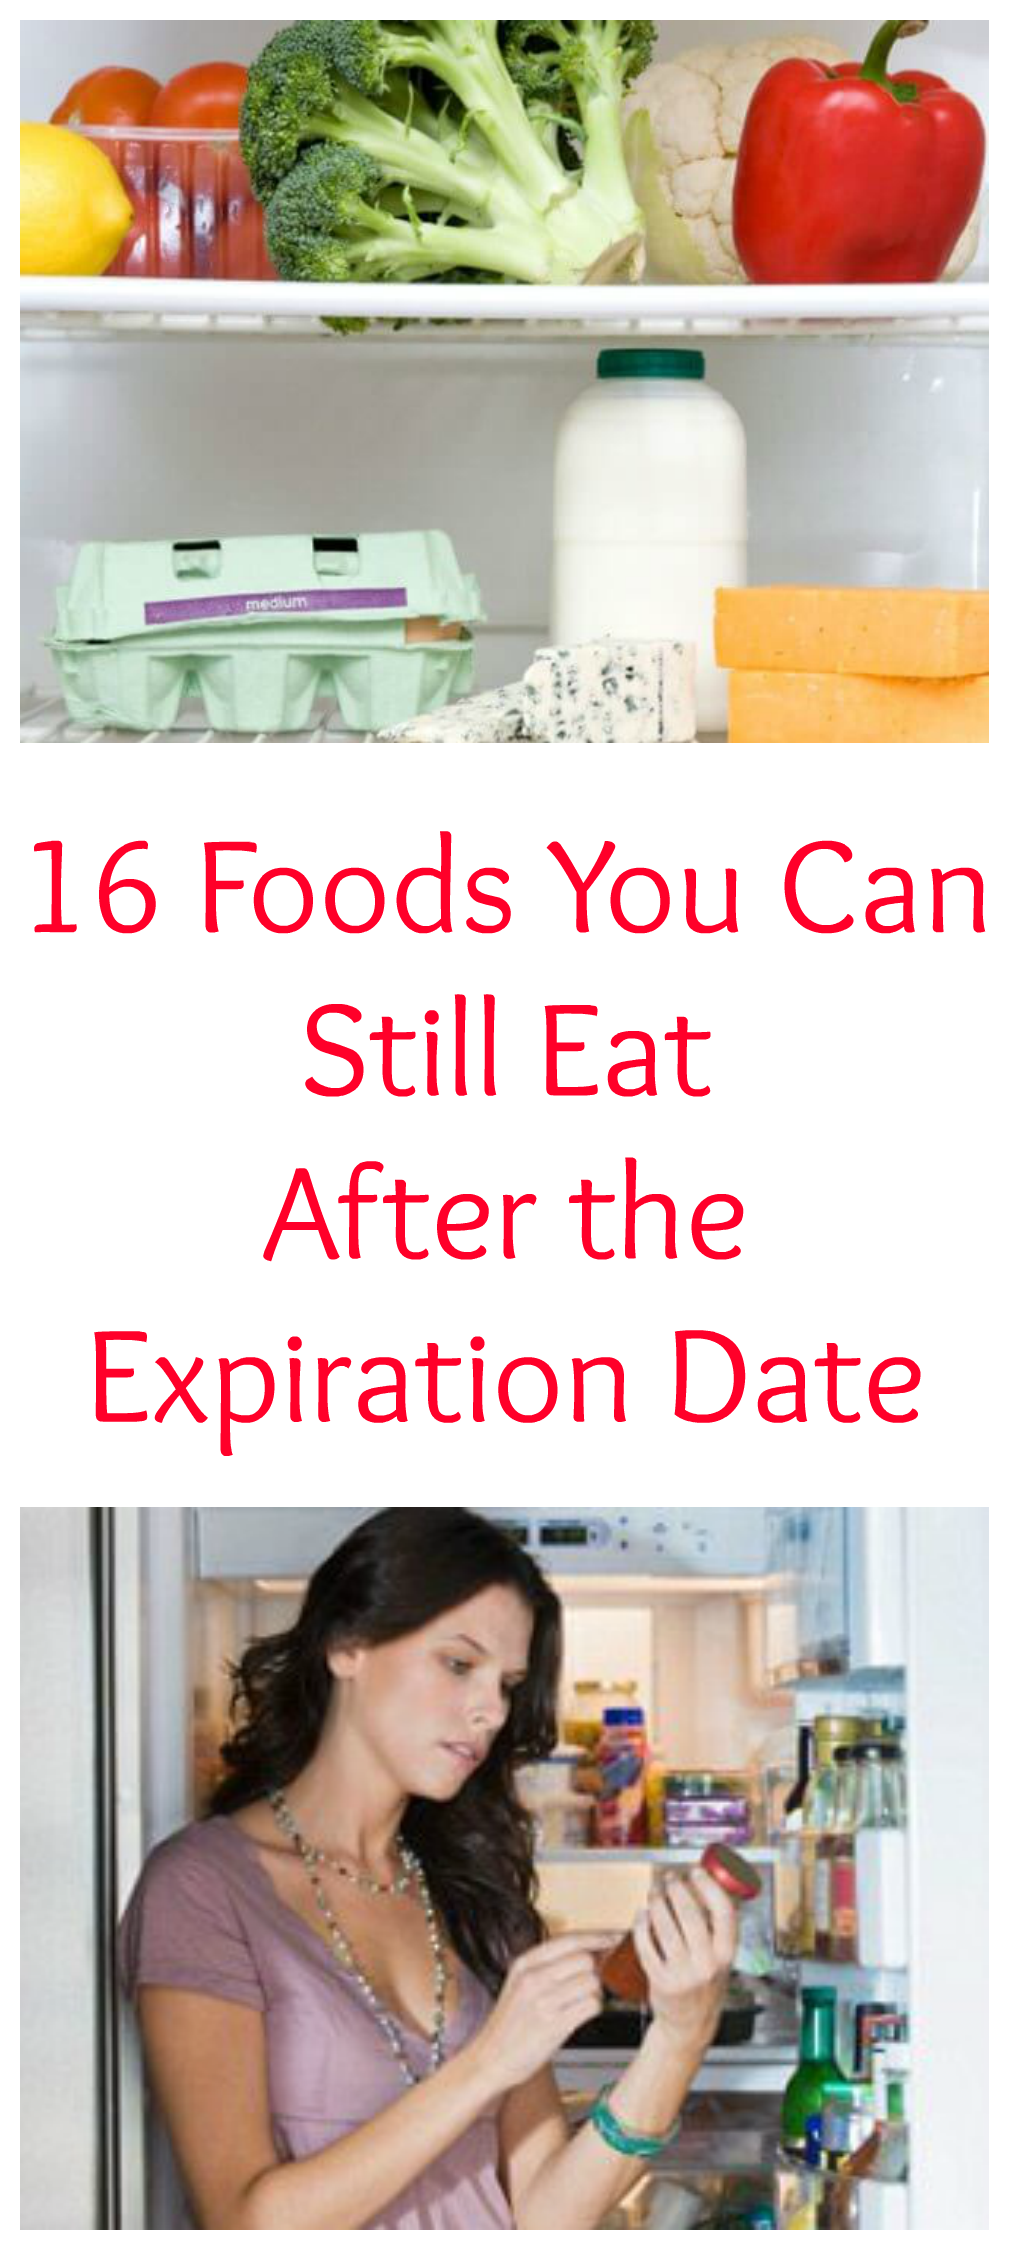 16 Foods You Can Still Eat After the Expiration Date - MyThirtySpot Are Lunchables Good Past The Expiration Date